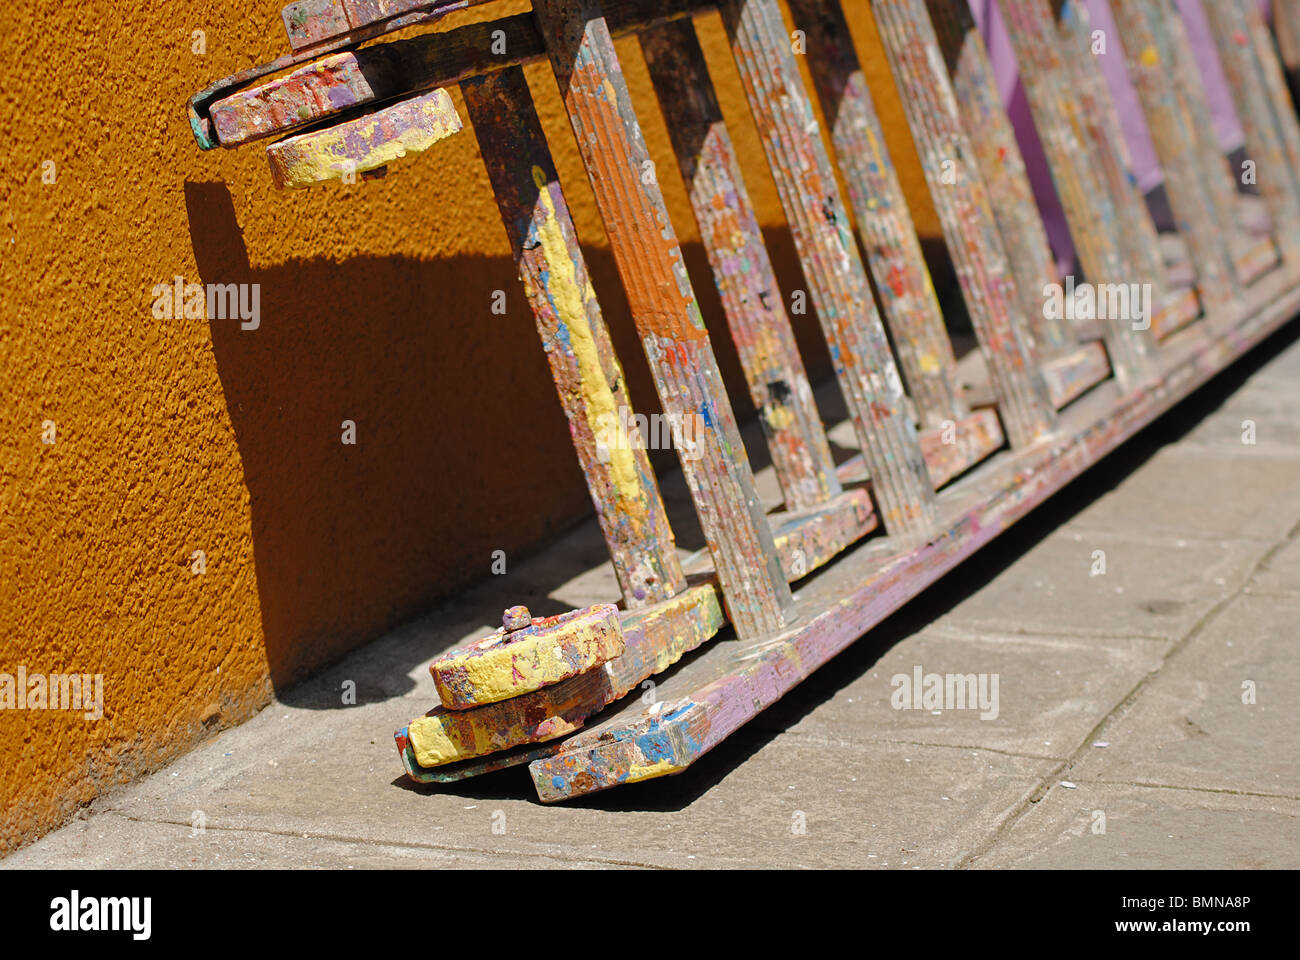 Ladder splattered with paint used for painting houses in Burano, Italy Stock Photo